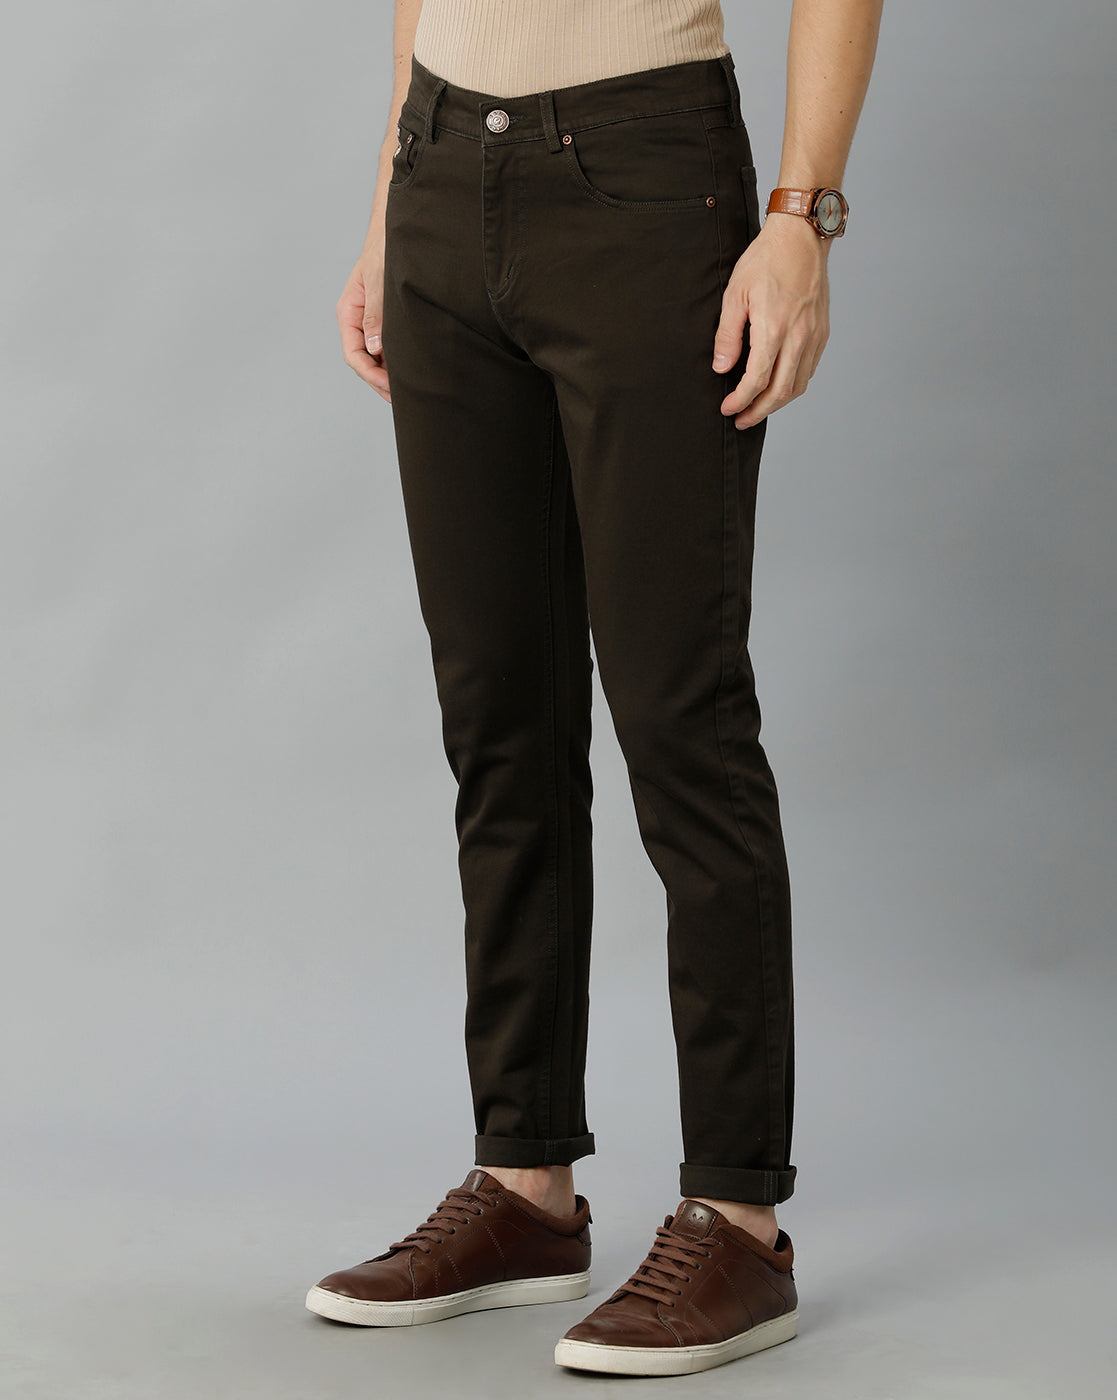 Dark Olive Solid Casual Cotton Trouser - Double Two